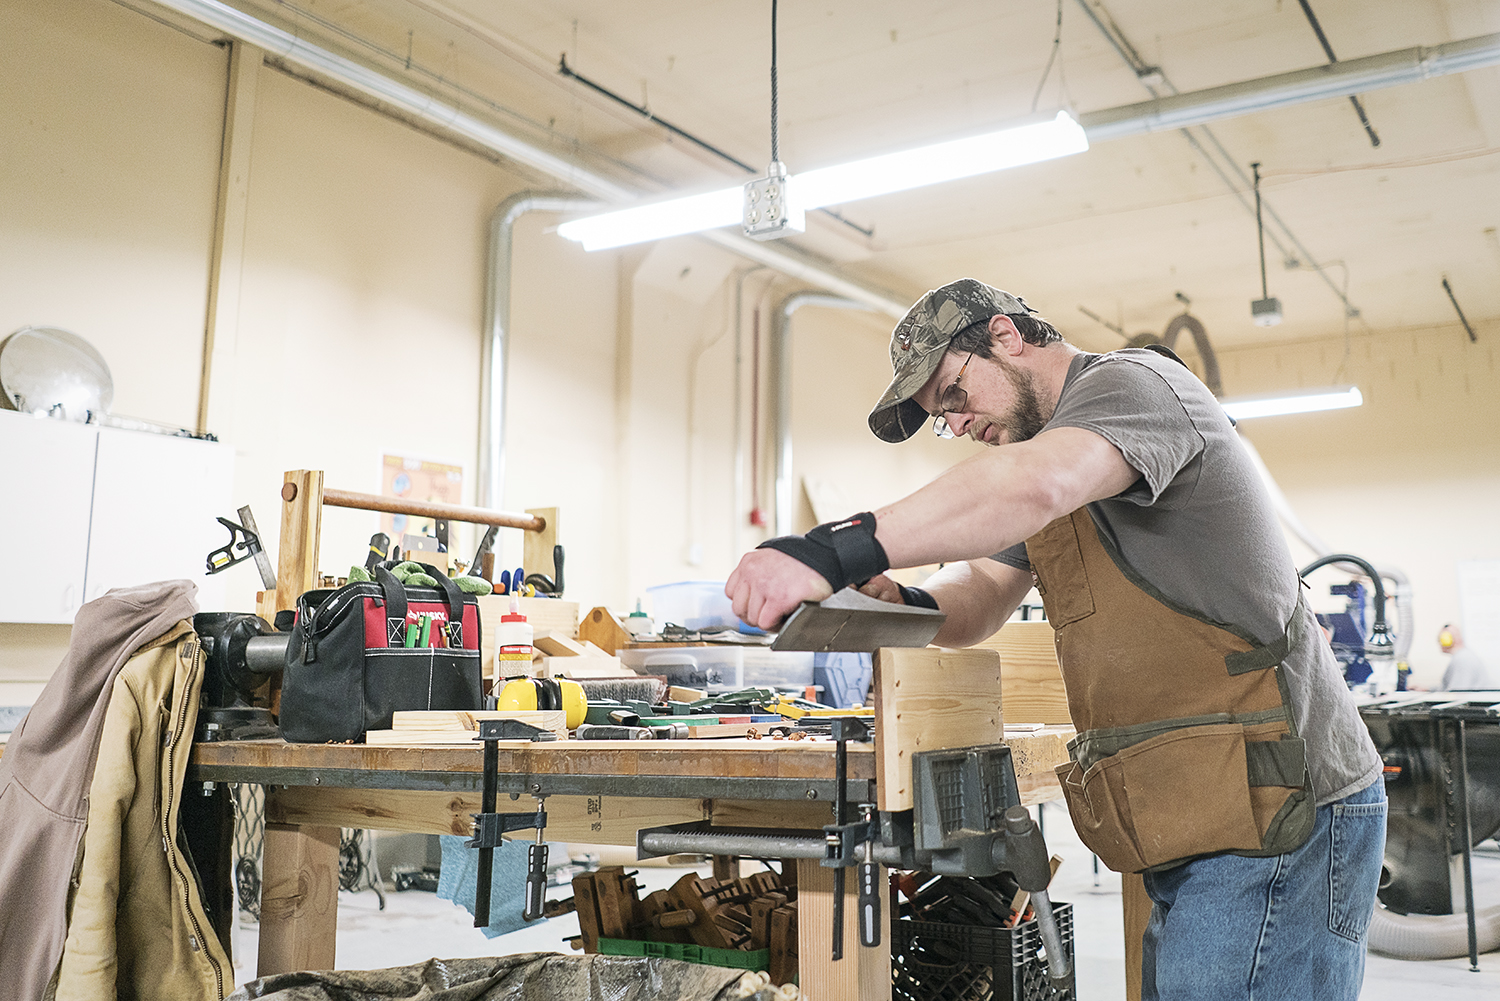 Flint, MI - Friday, February 2, 2018: Michael Callahan from Flint rounds the edges of a couple of panels for a cabinet he is building at Factory Two in Flint.